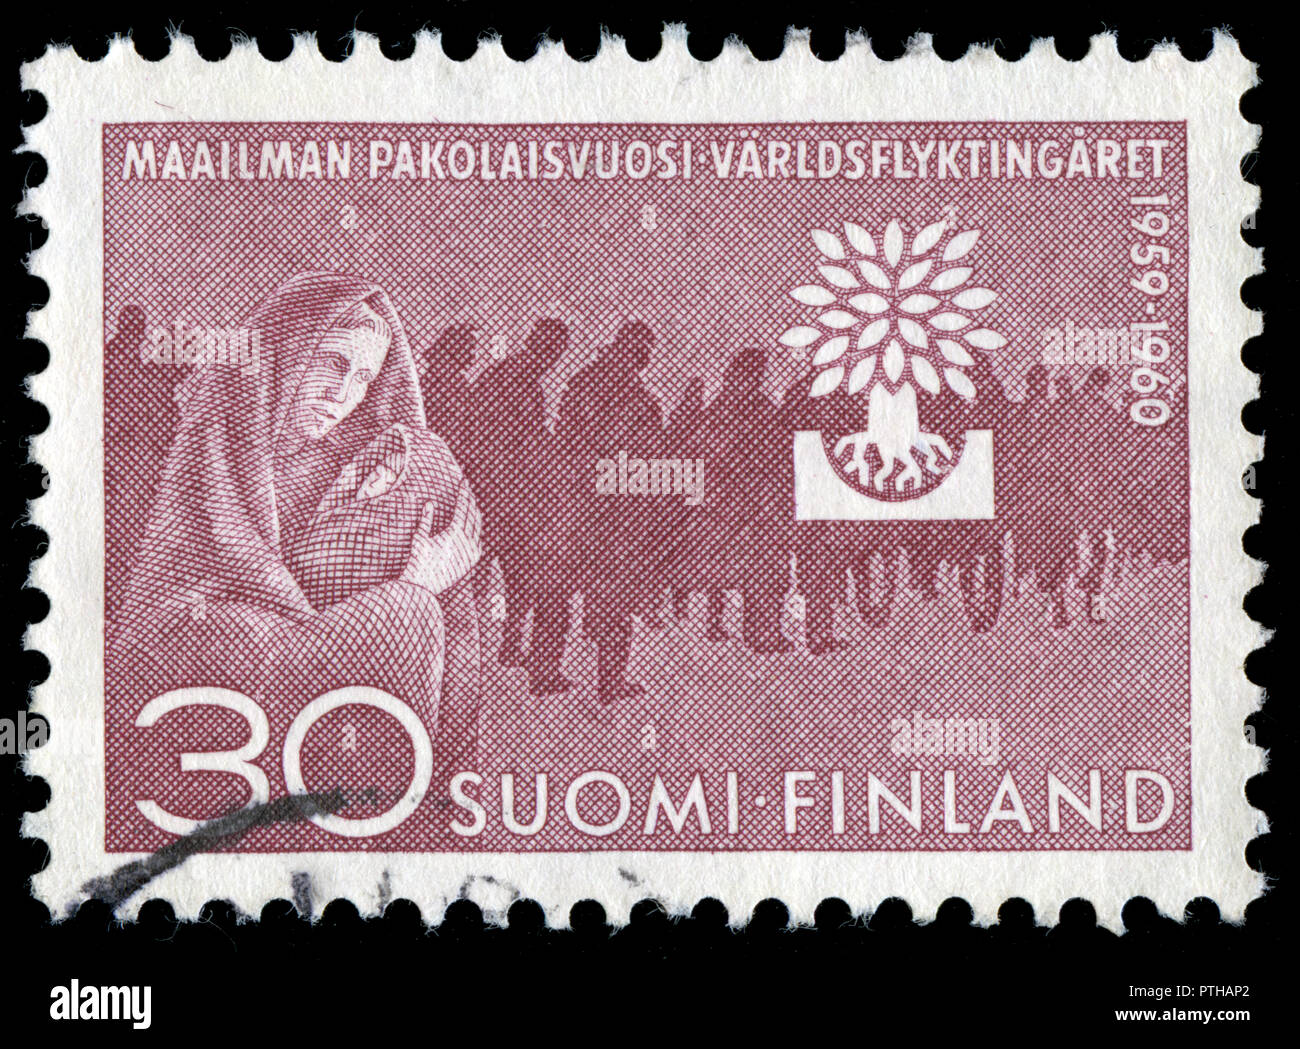 Postmarked stamp from Finland in the World Refugee Year 1959-1960 series  issued in 1960 Stock Photo - Alamy